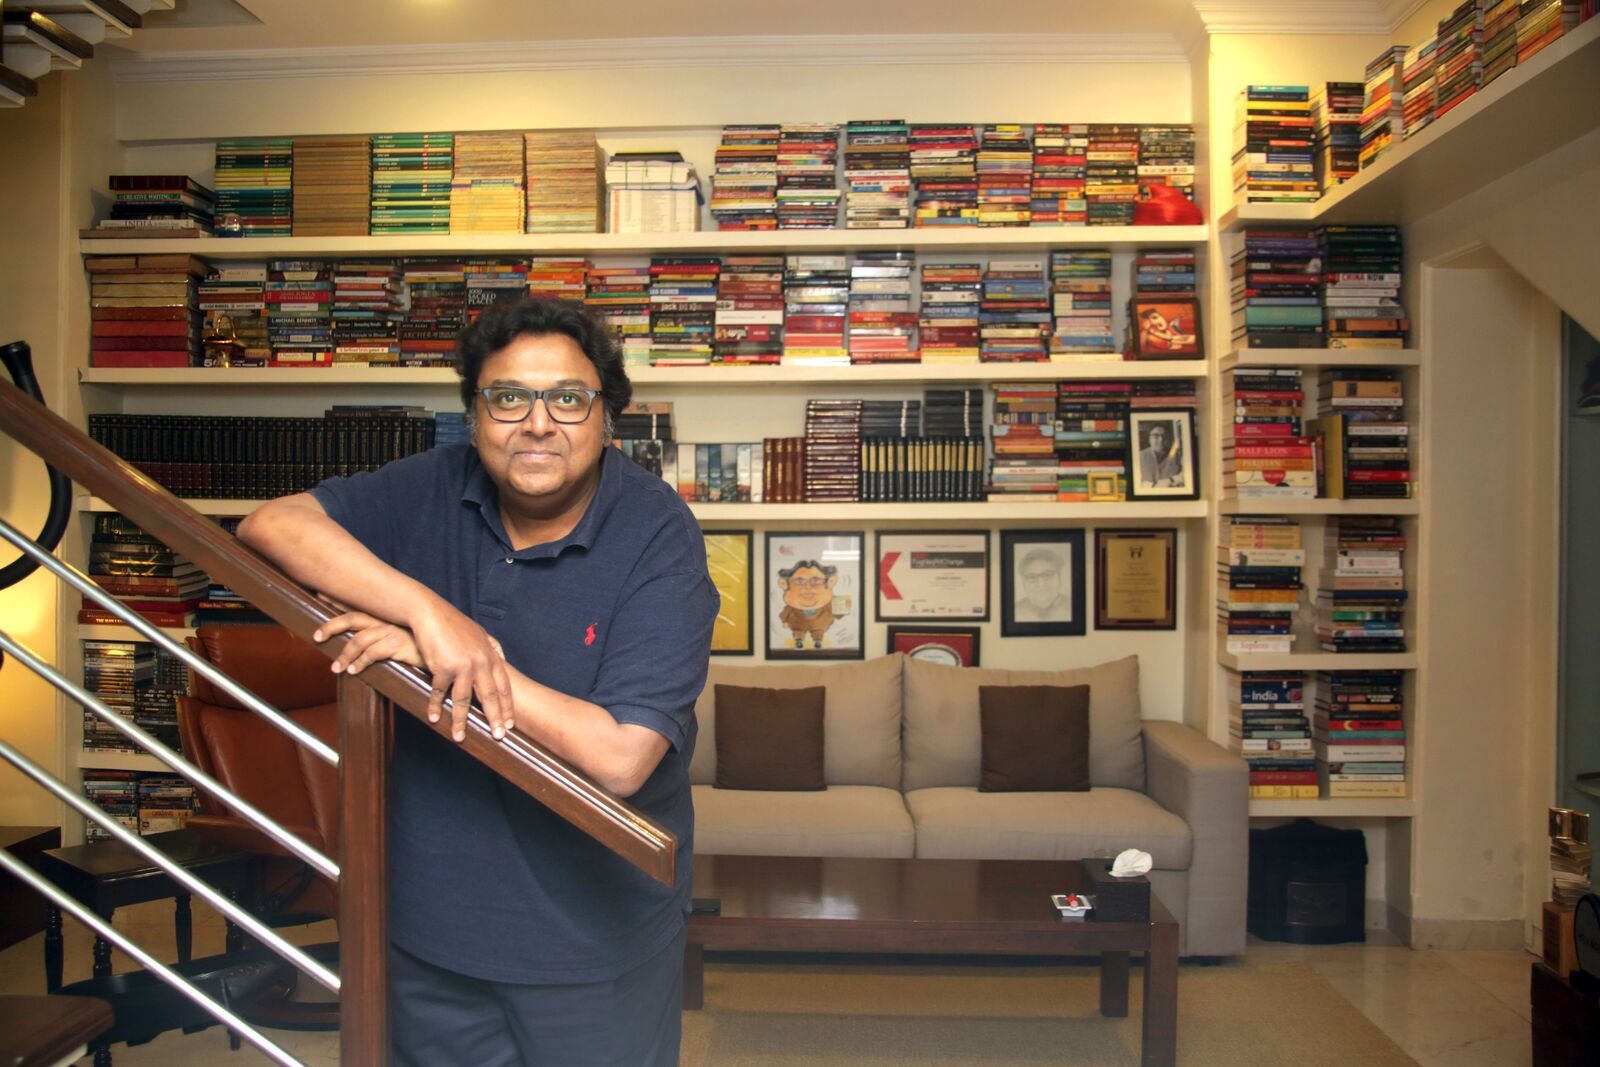 Writer of the Month: Q&A With Ashwin Sanghi